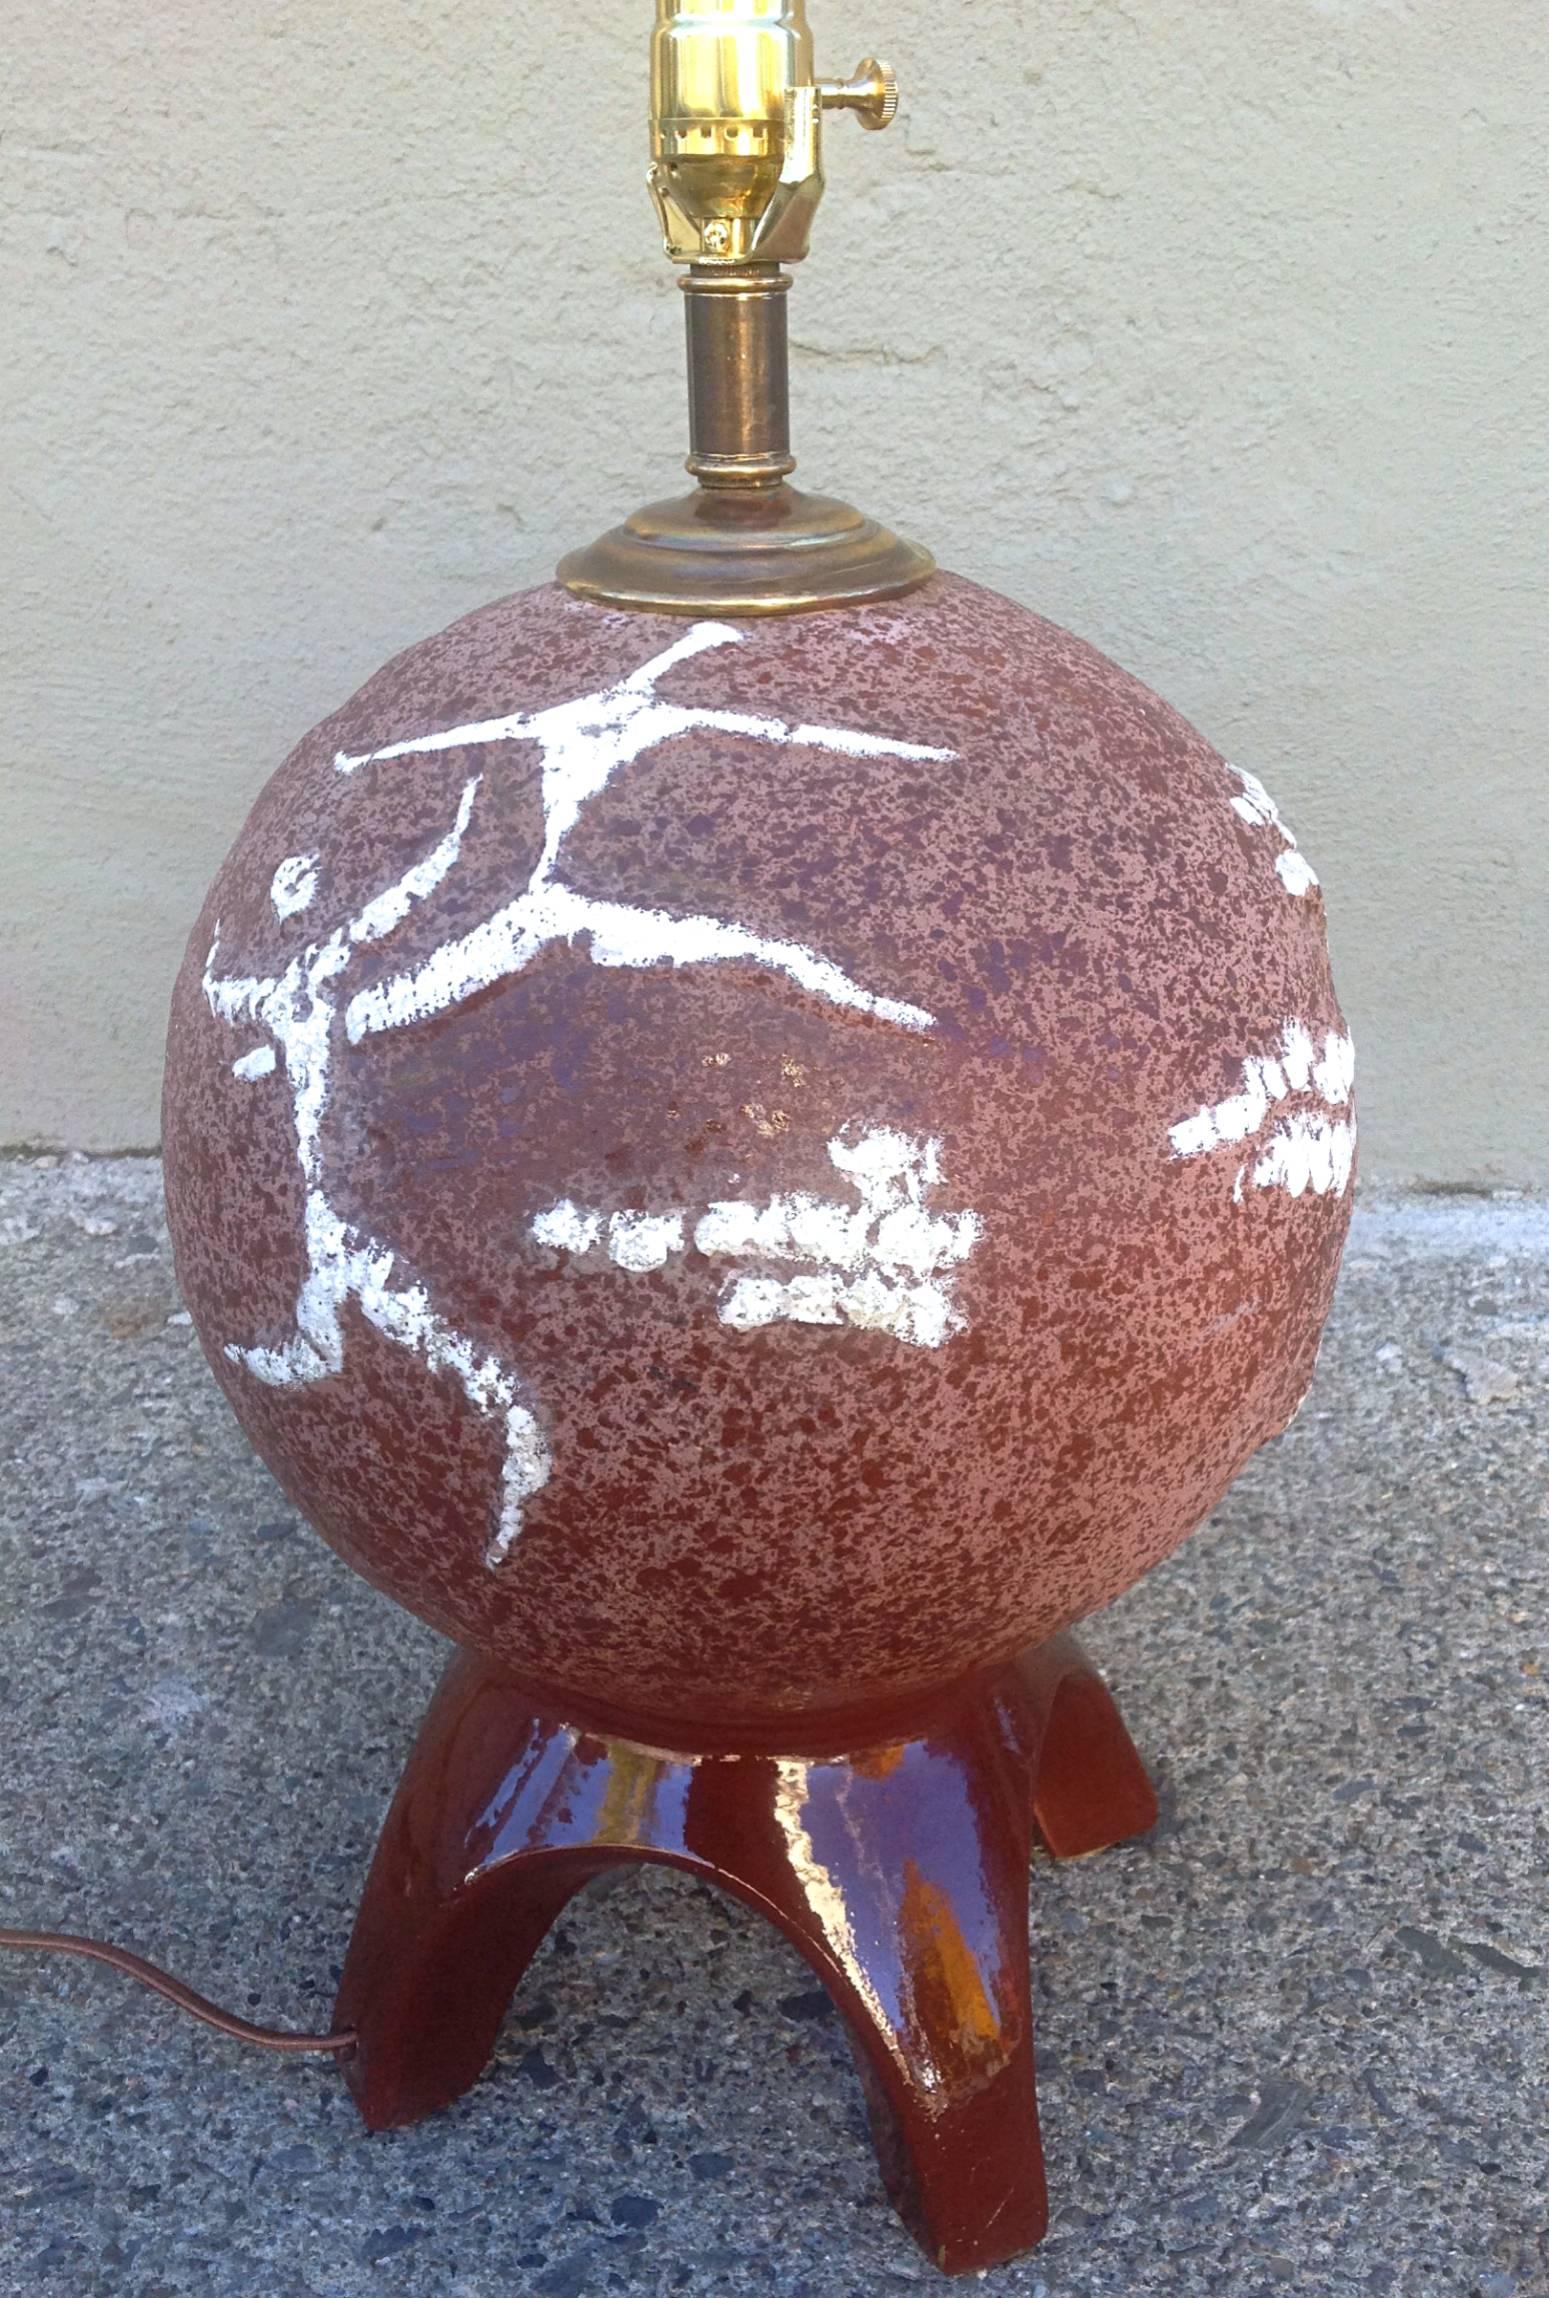 Mid-Century Modern Ceramic Spherical Table Lamp with Dancing Figures by Tye of California For Sale